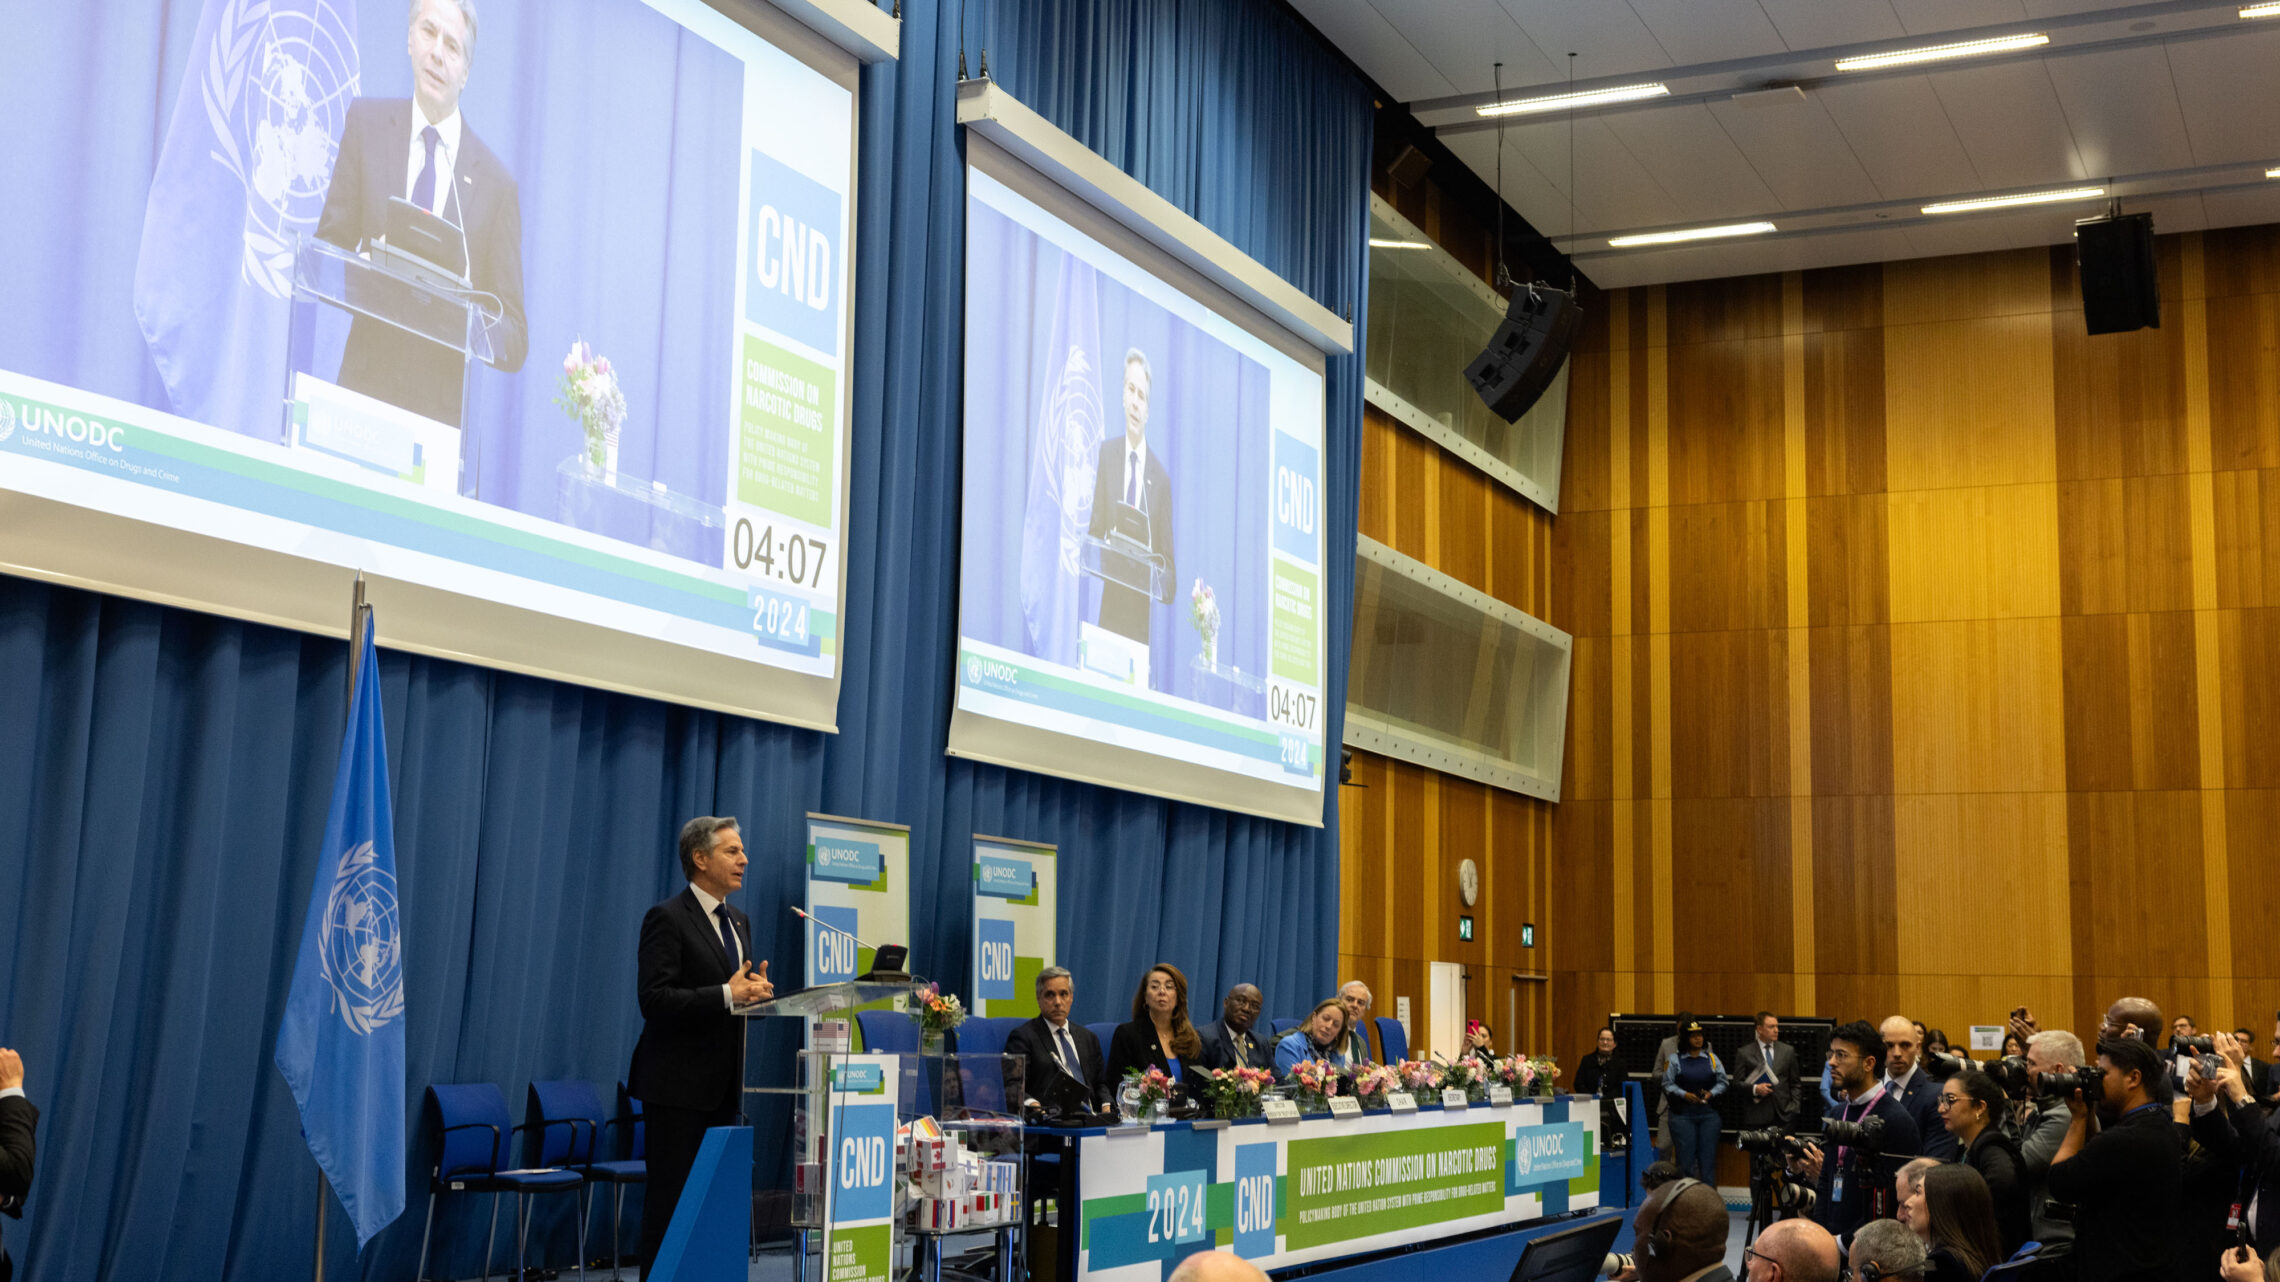 Secretary of State Blinken addressing the UN Commission on Narcotic Drugs in Vienna with his image appearing on two large screens behind him and an audience in front of him.